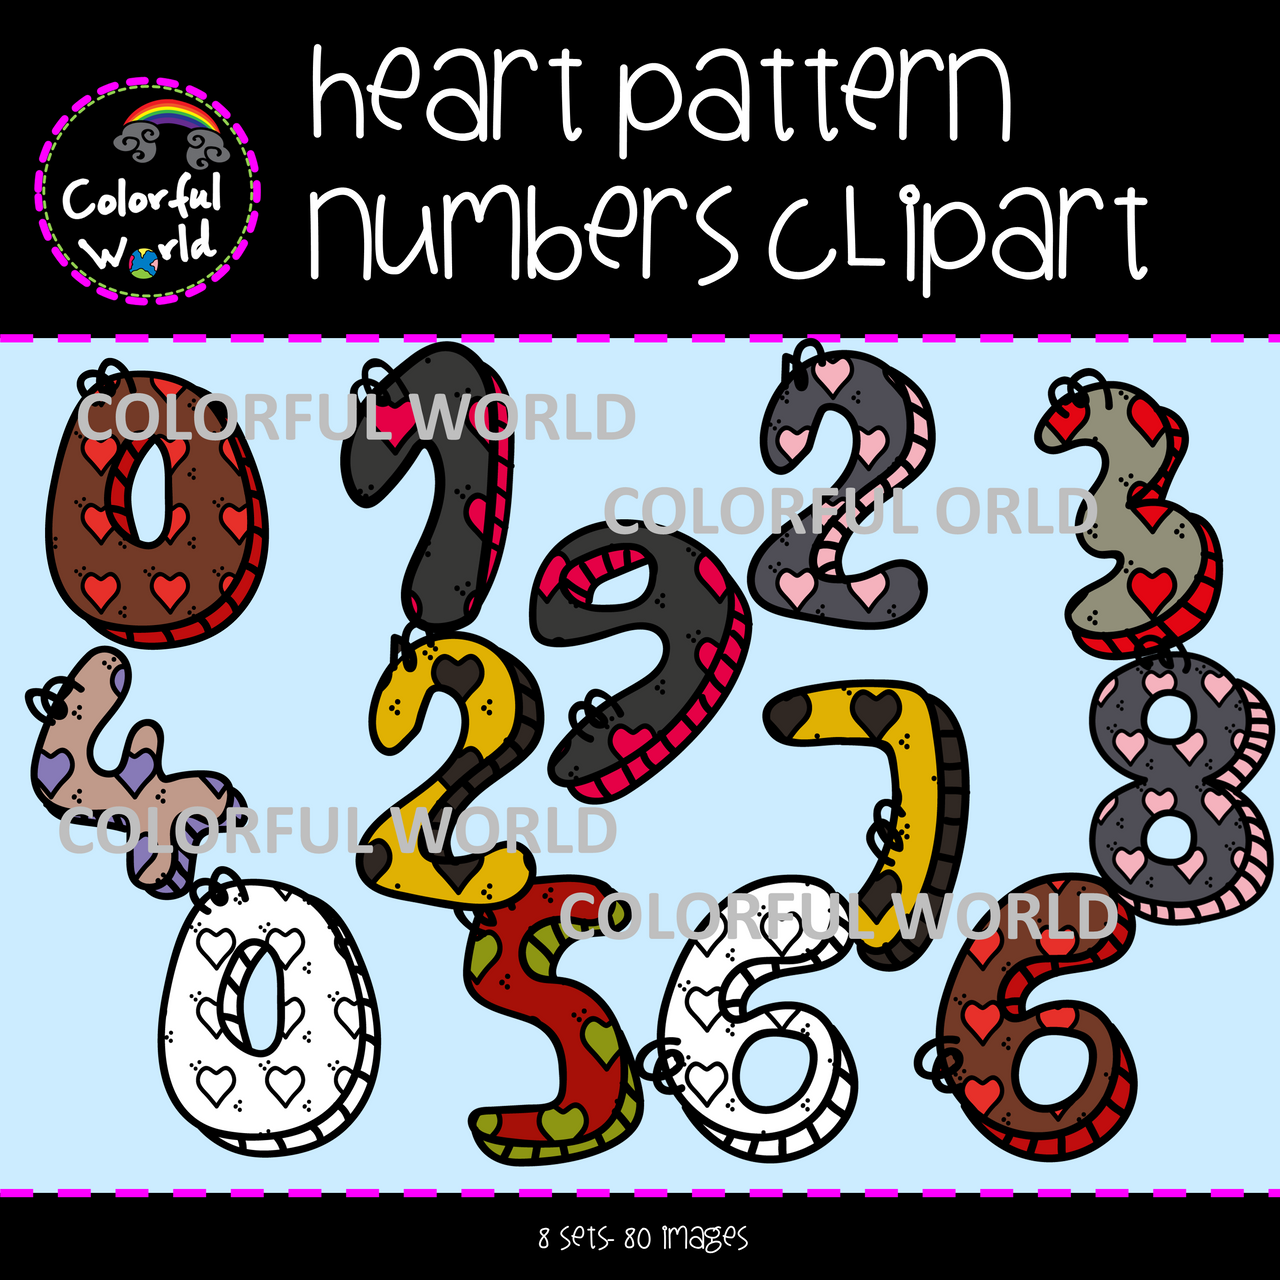 Heart pattern numbers clipart